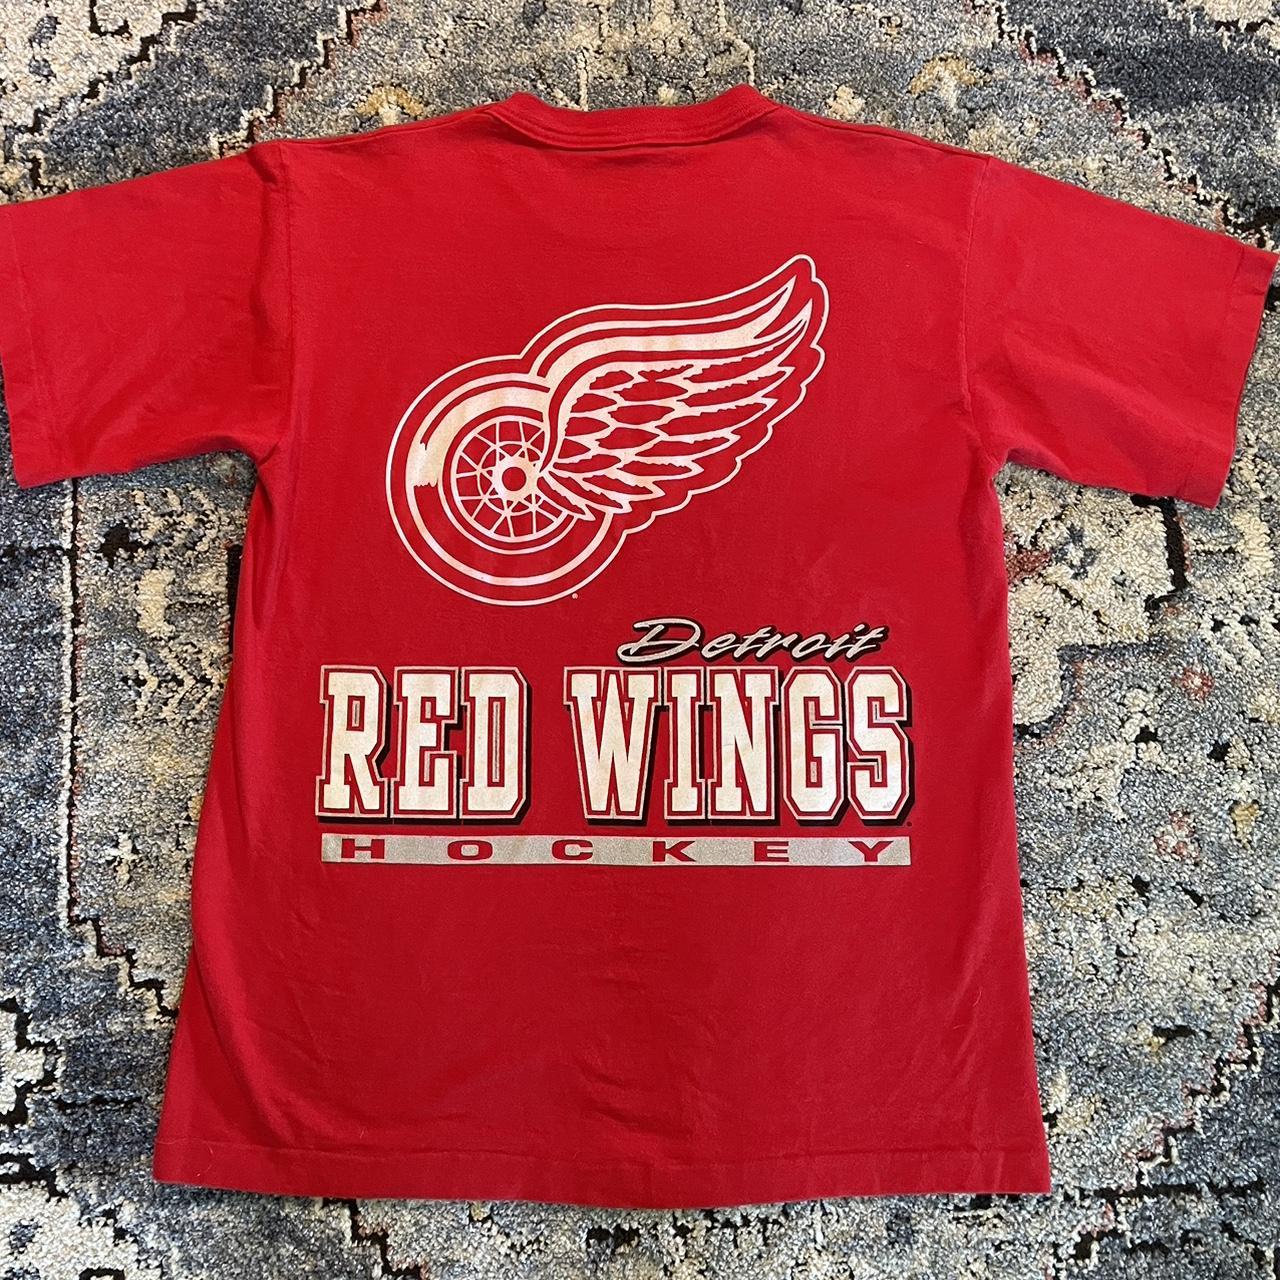 Red Wings throwback jersey